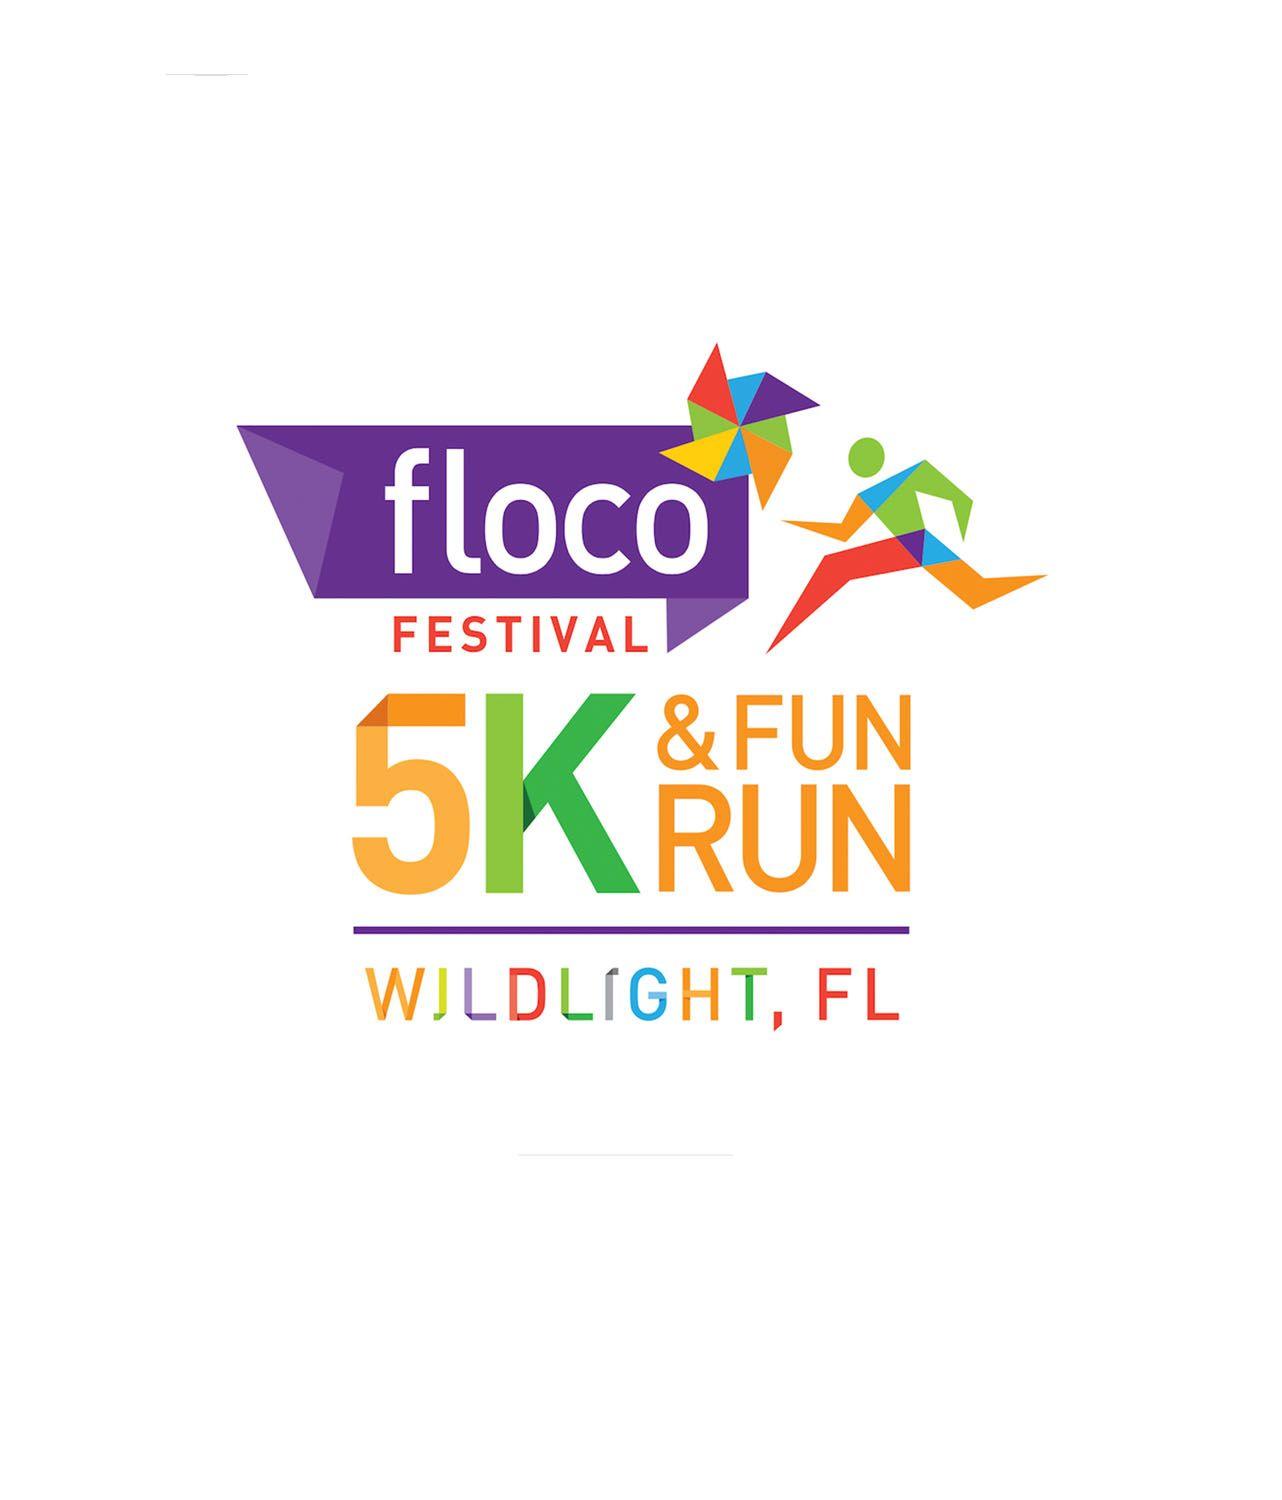 Fun Places Logo - floco logo - Wildlight | Florida Lowcountry Living | Raydient Places ...